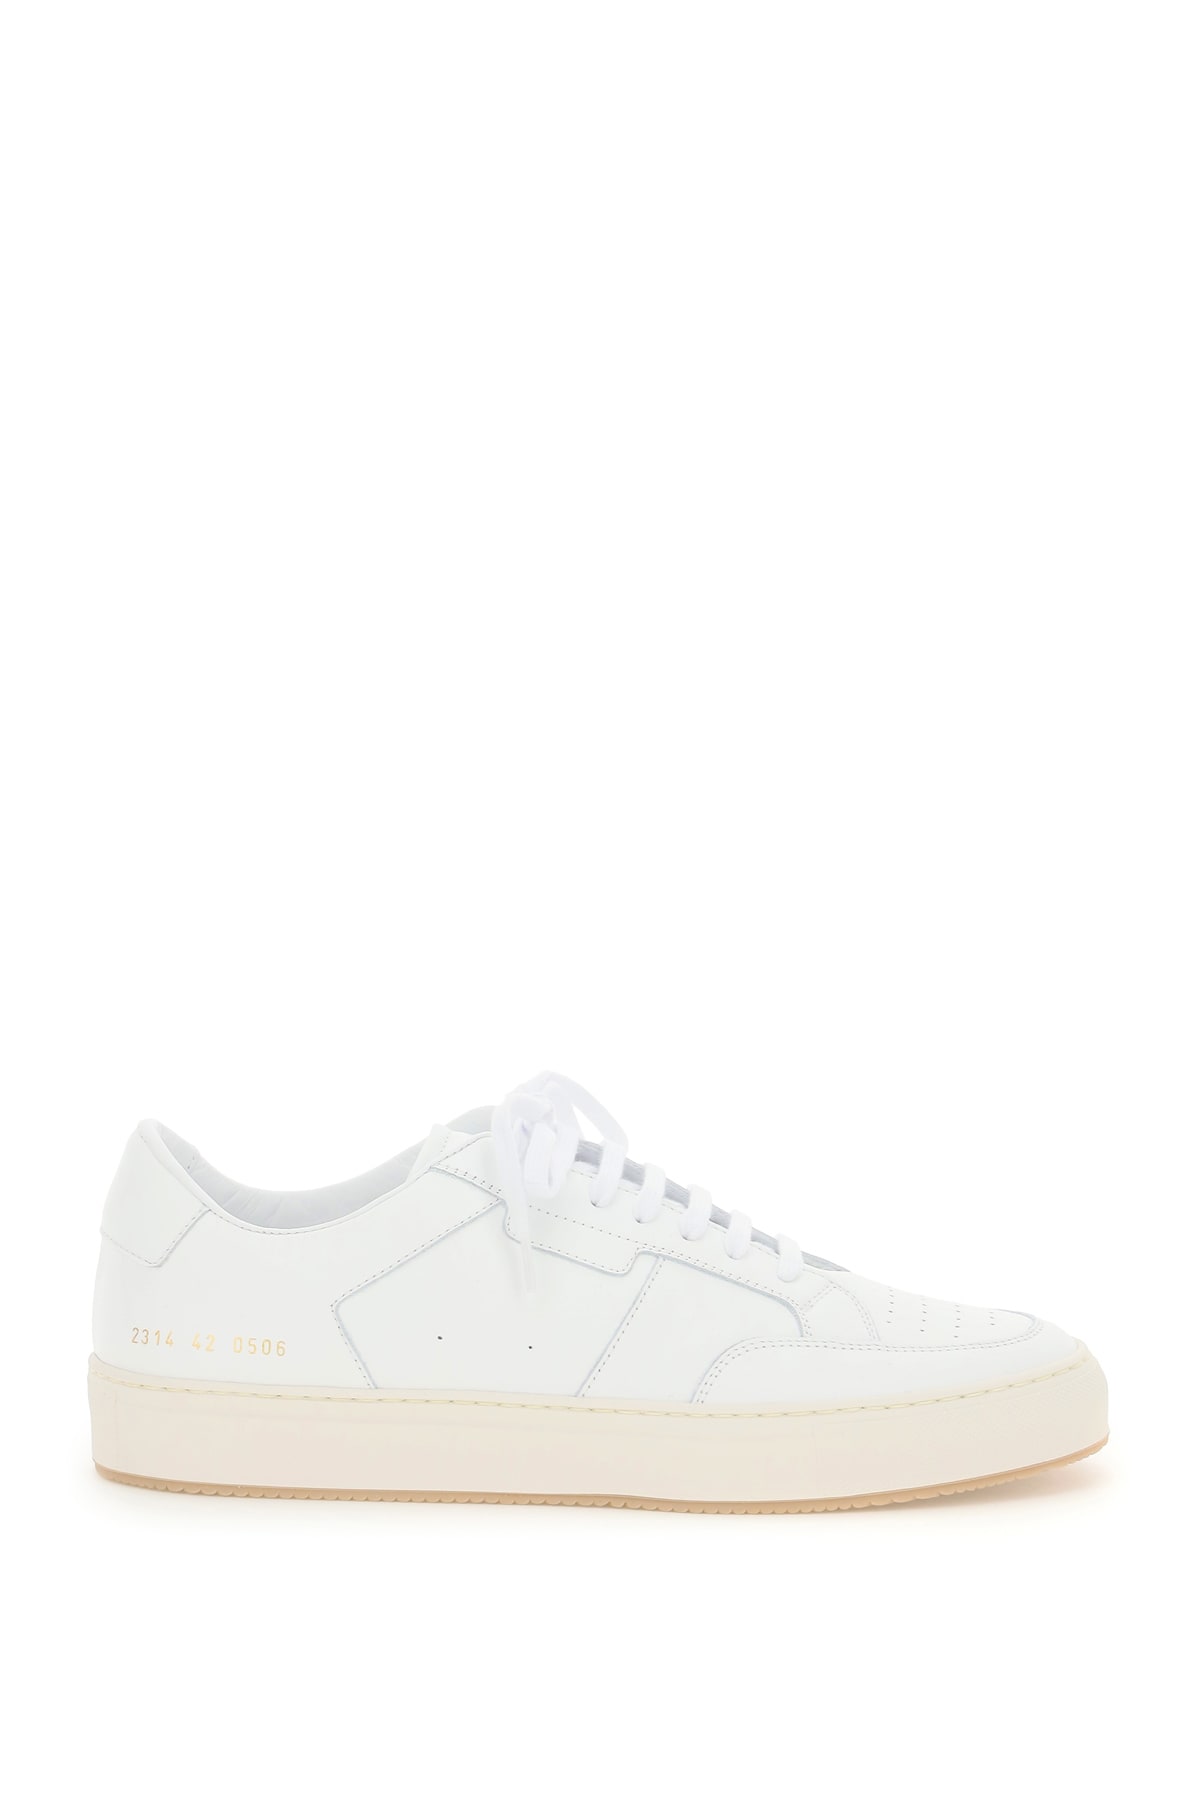 Common Projects Leather Tennis Sneakers